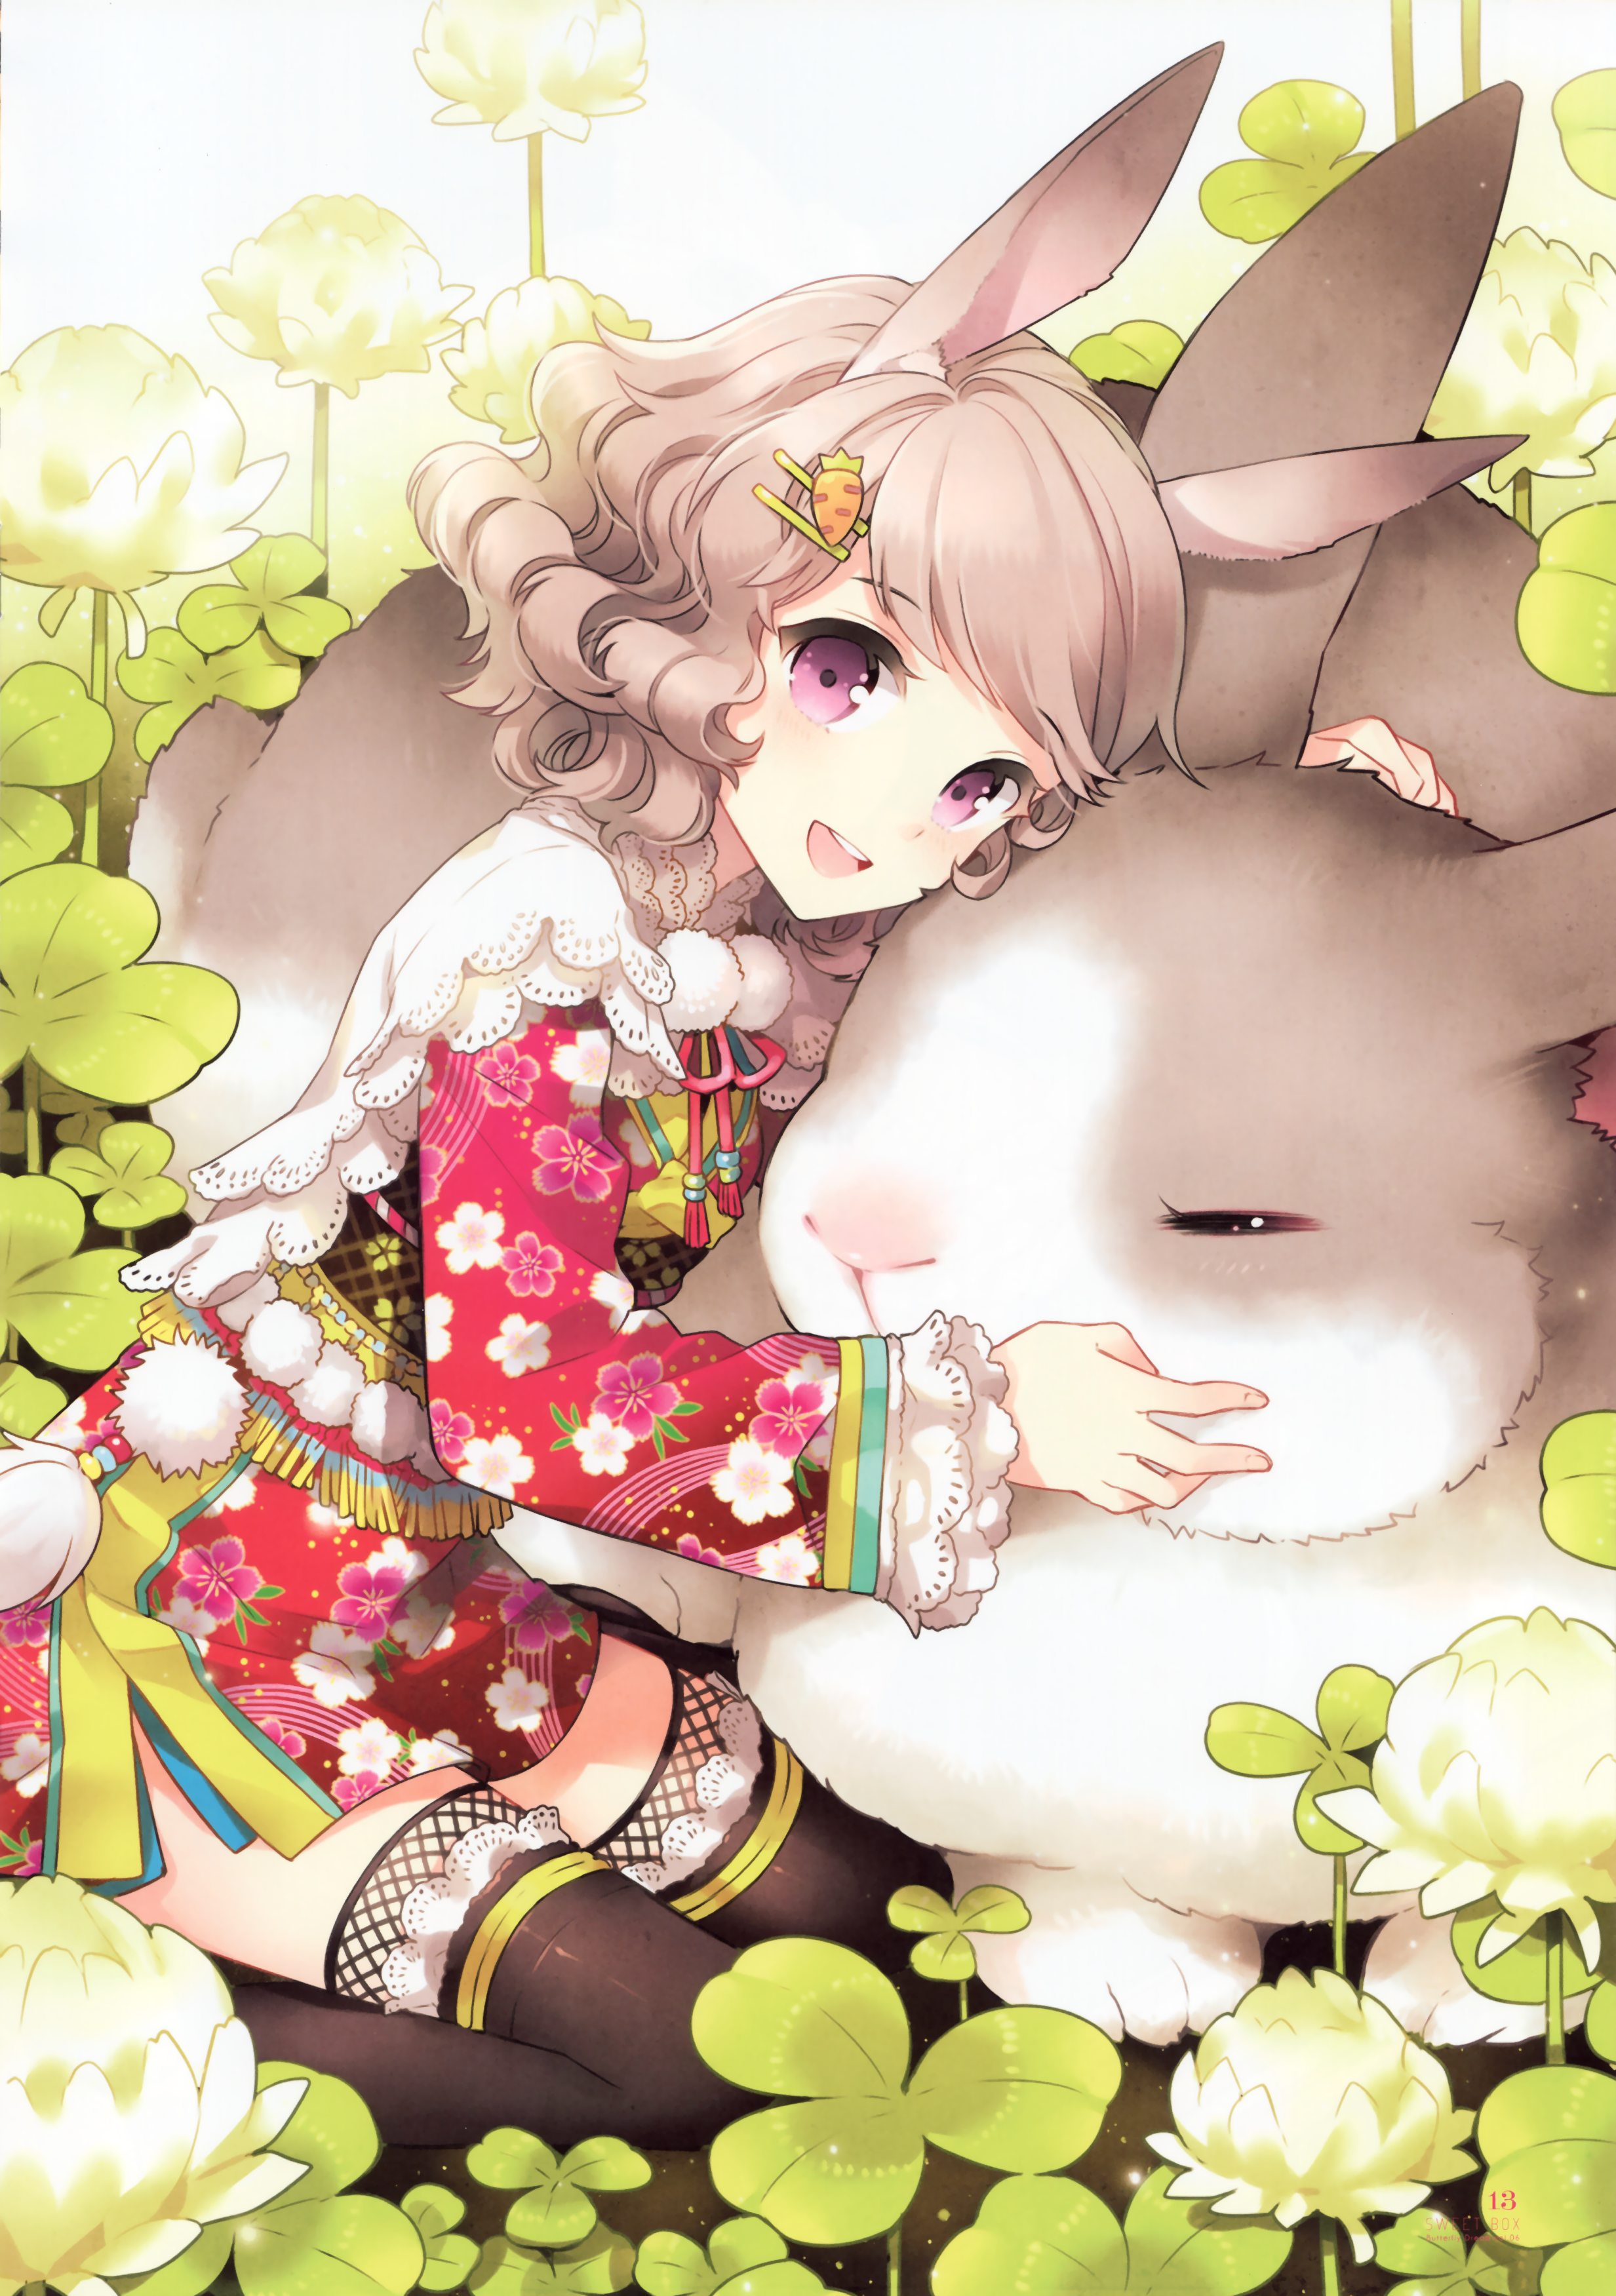 2014.04.27-346yande.re 285579 animal_ears butterfly_dream nardack thighhighs